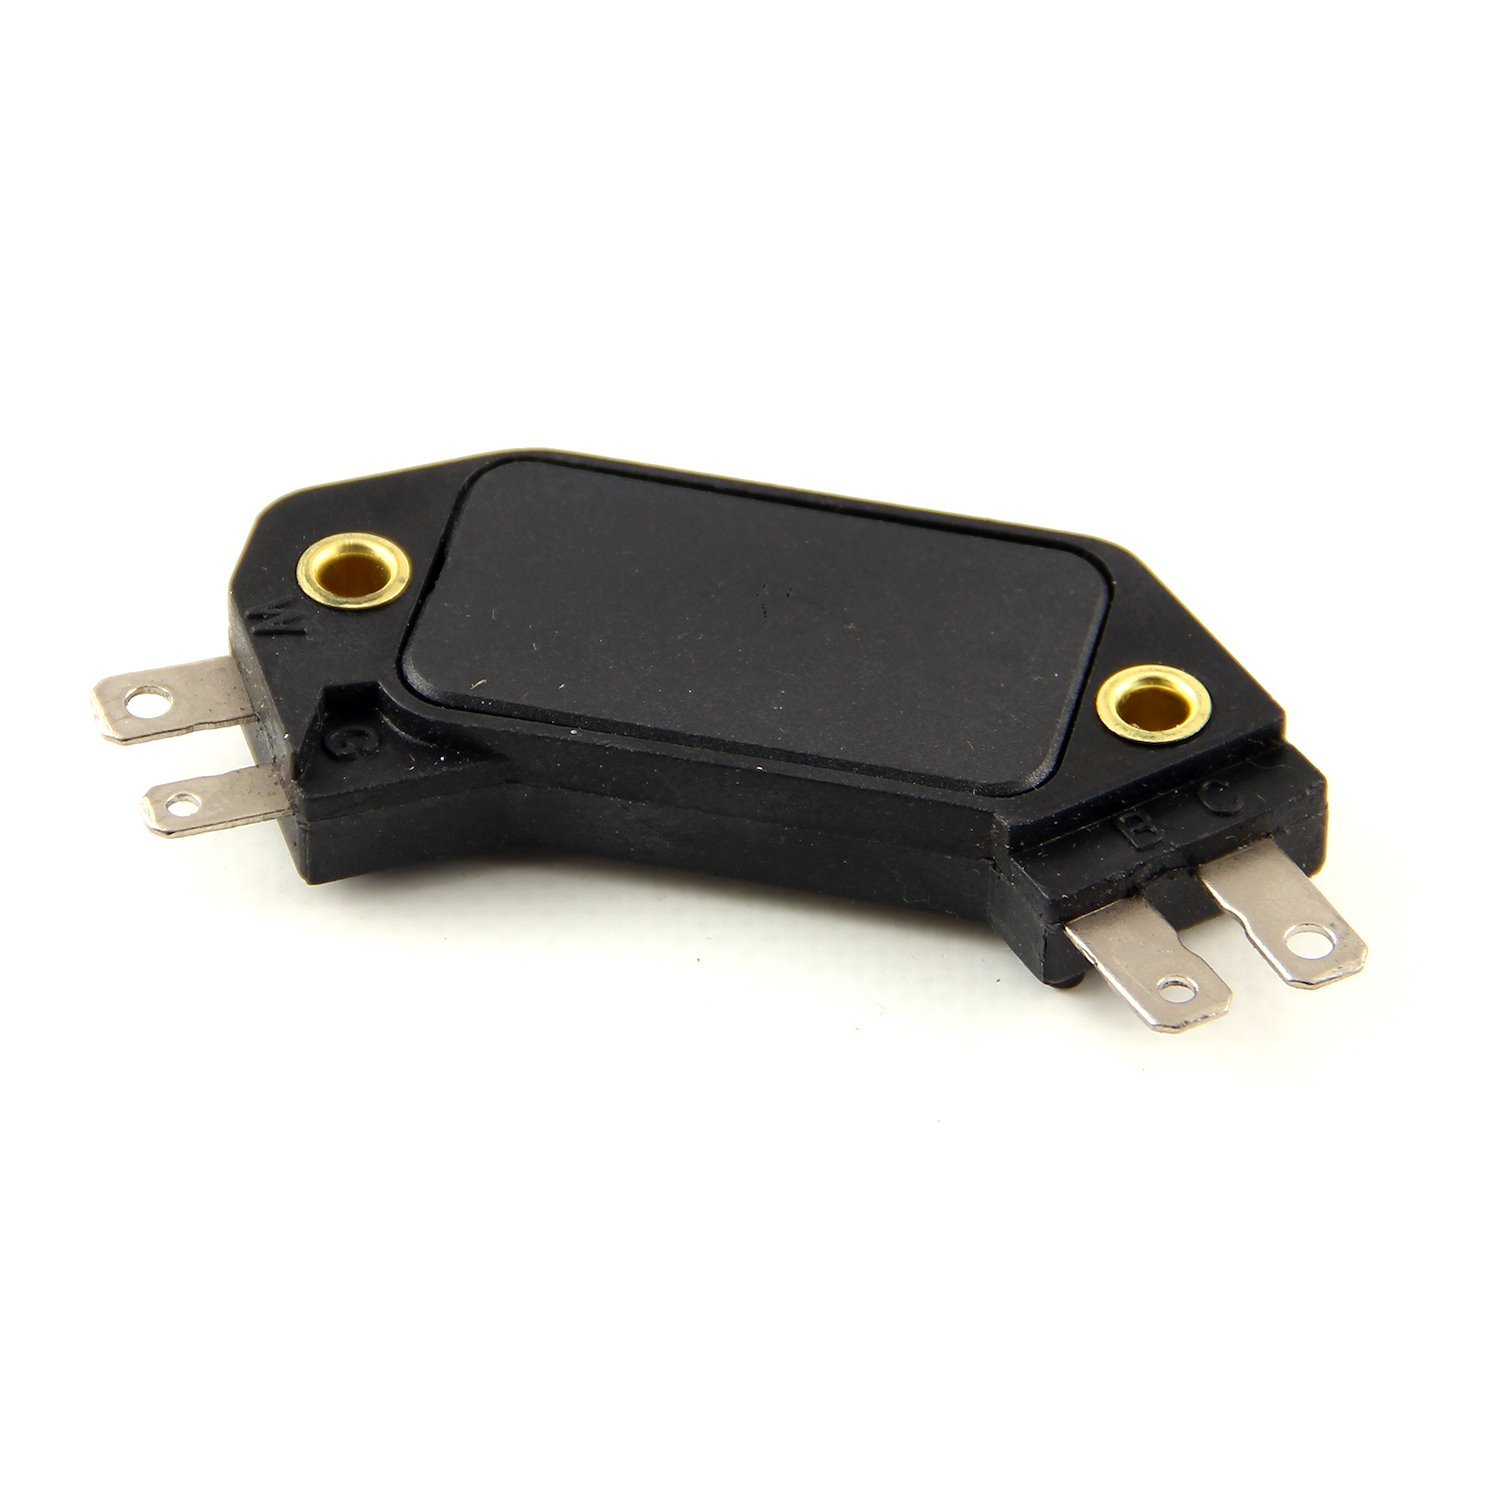 HEI Distributor 4 Pin Magnetic Pickup Ignition Control Module Suits Pc6000